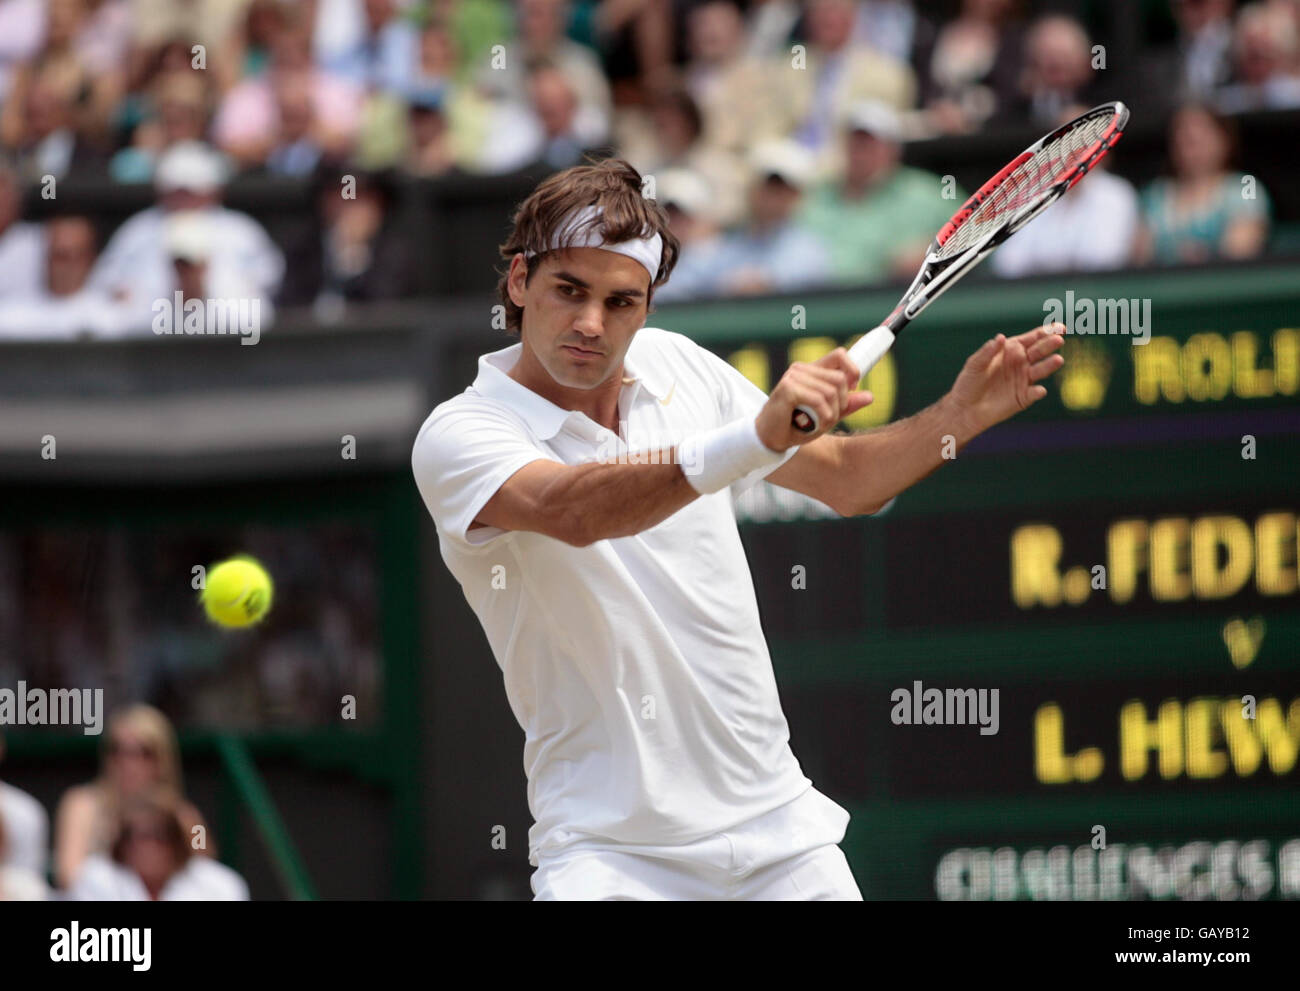 Switzerland's Roger Federer in action against Australia's Lleyton Hewitt during the Wimbledon Championships 2008 at the All England Tennis Club in Wimbledon. Stock Photo